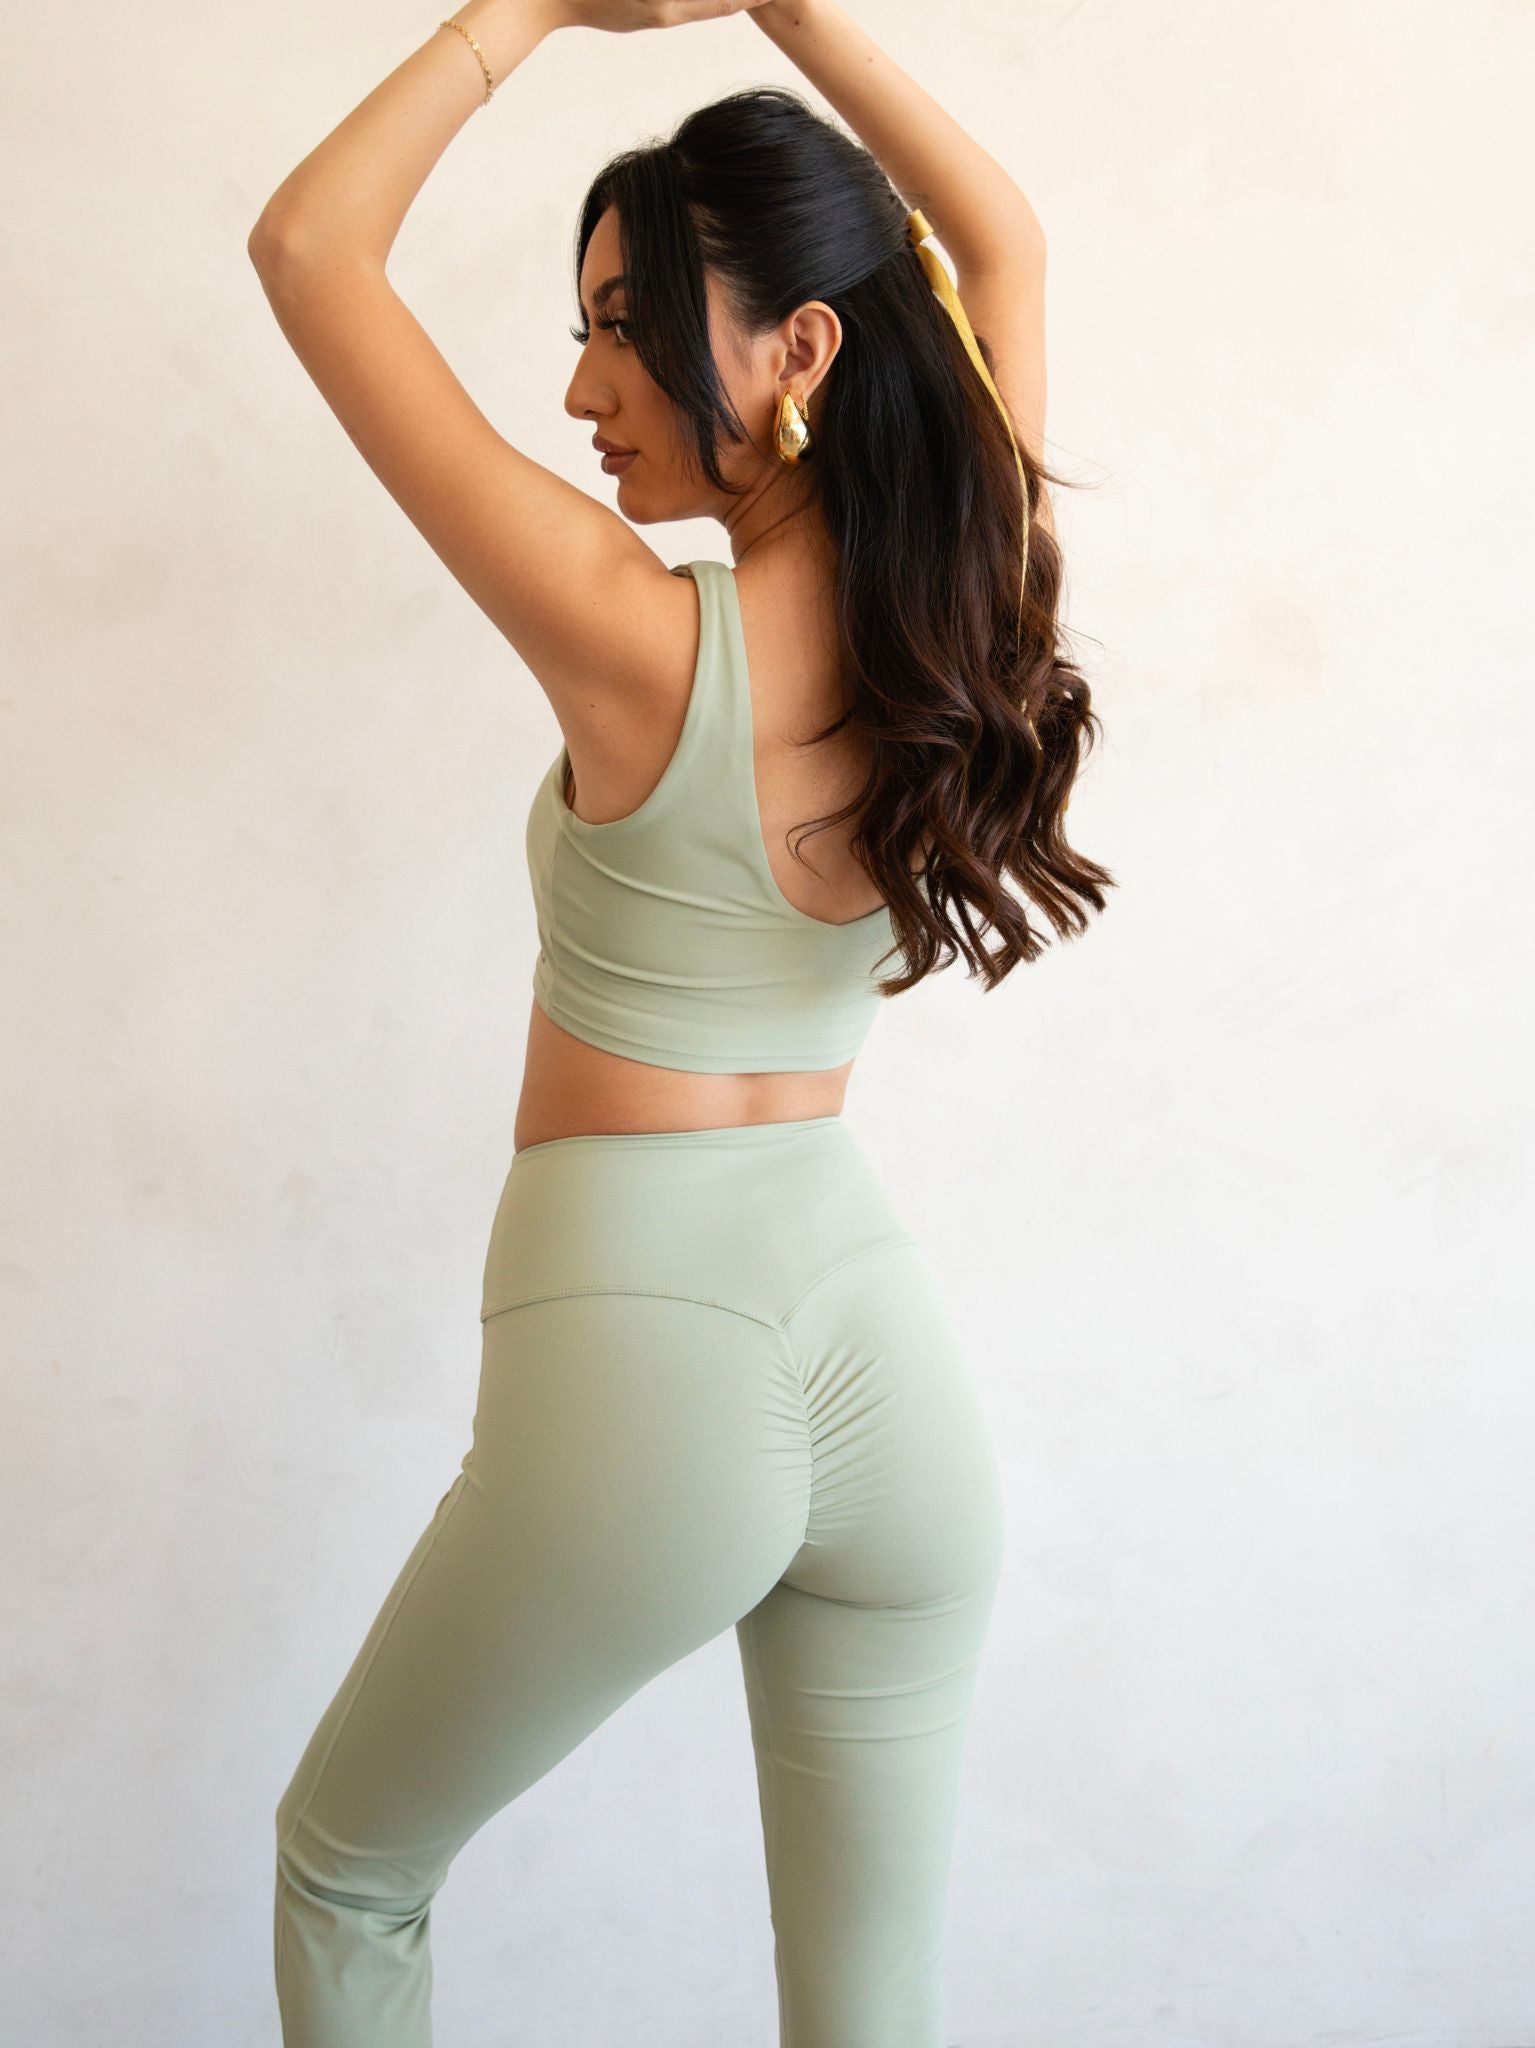 Best Flare Yoga Pant In 2023 - Top 10 Flare Yoga Pants Review 